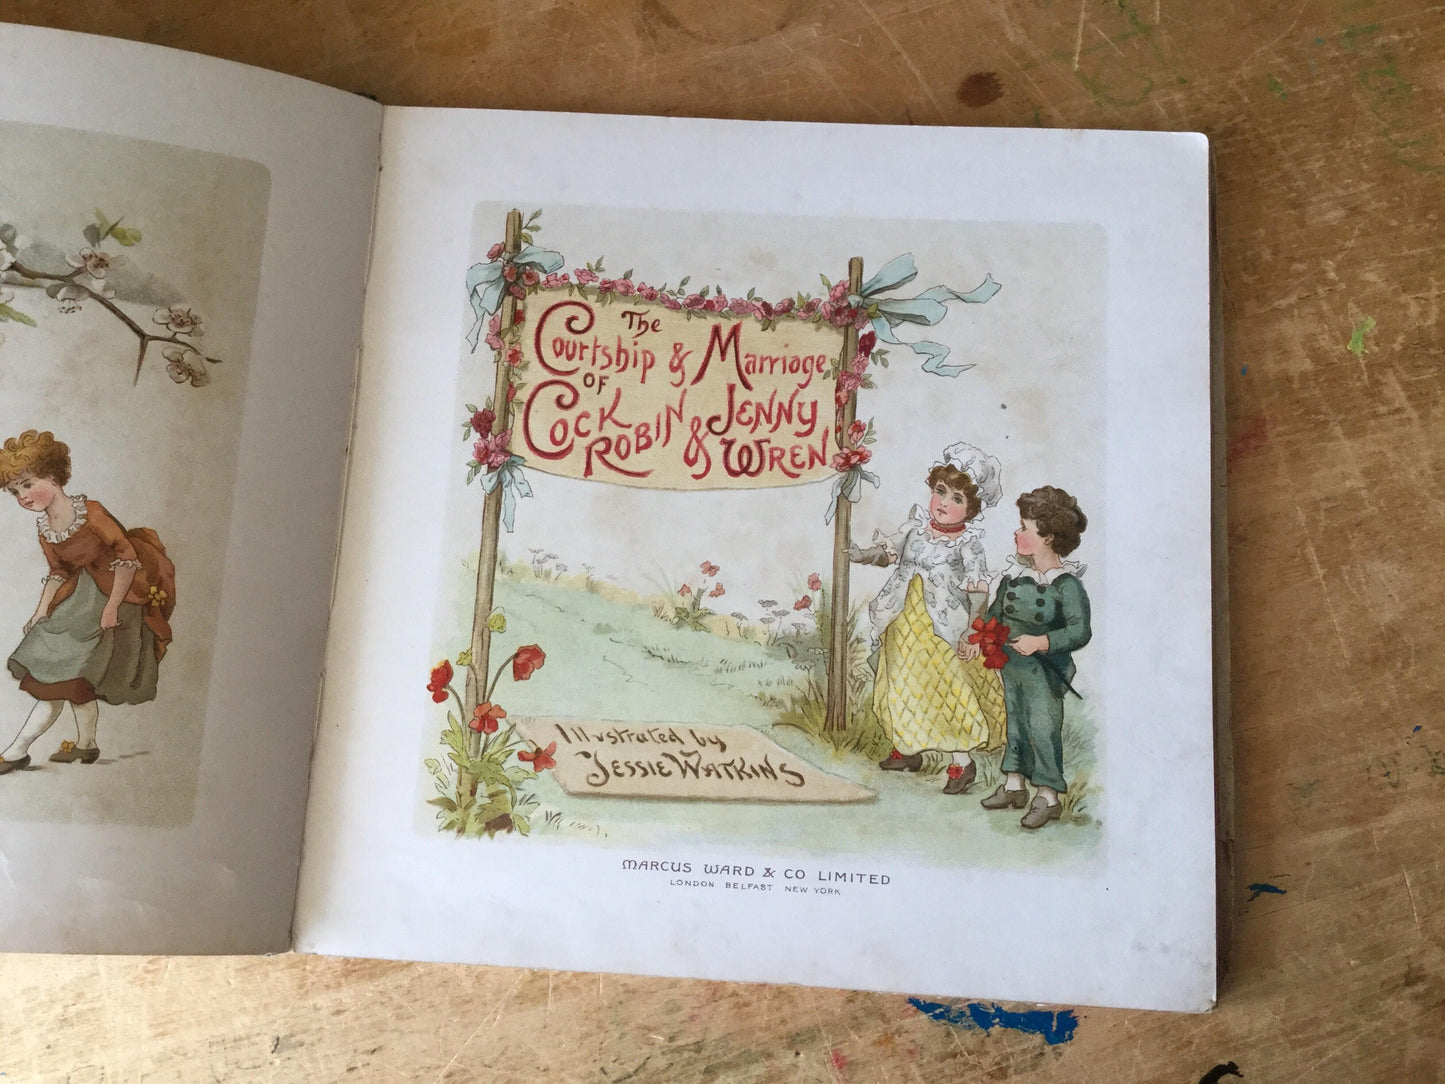 Antique Illustrated Children's Book, The Courtship of C. Robin and J. Wren (c.1800s)